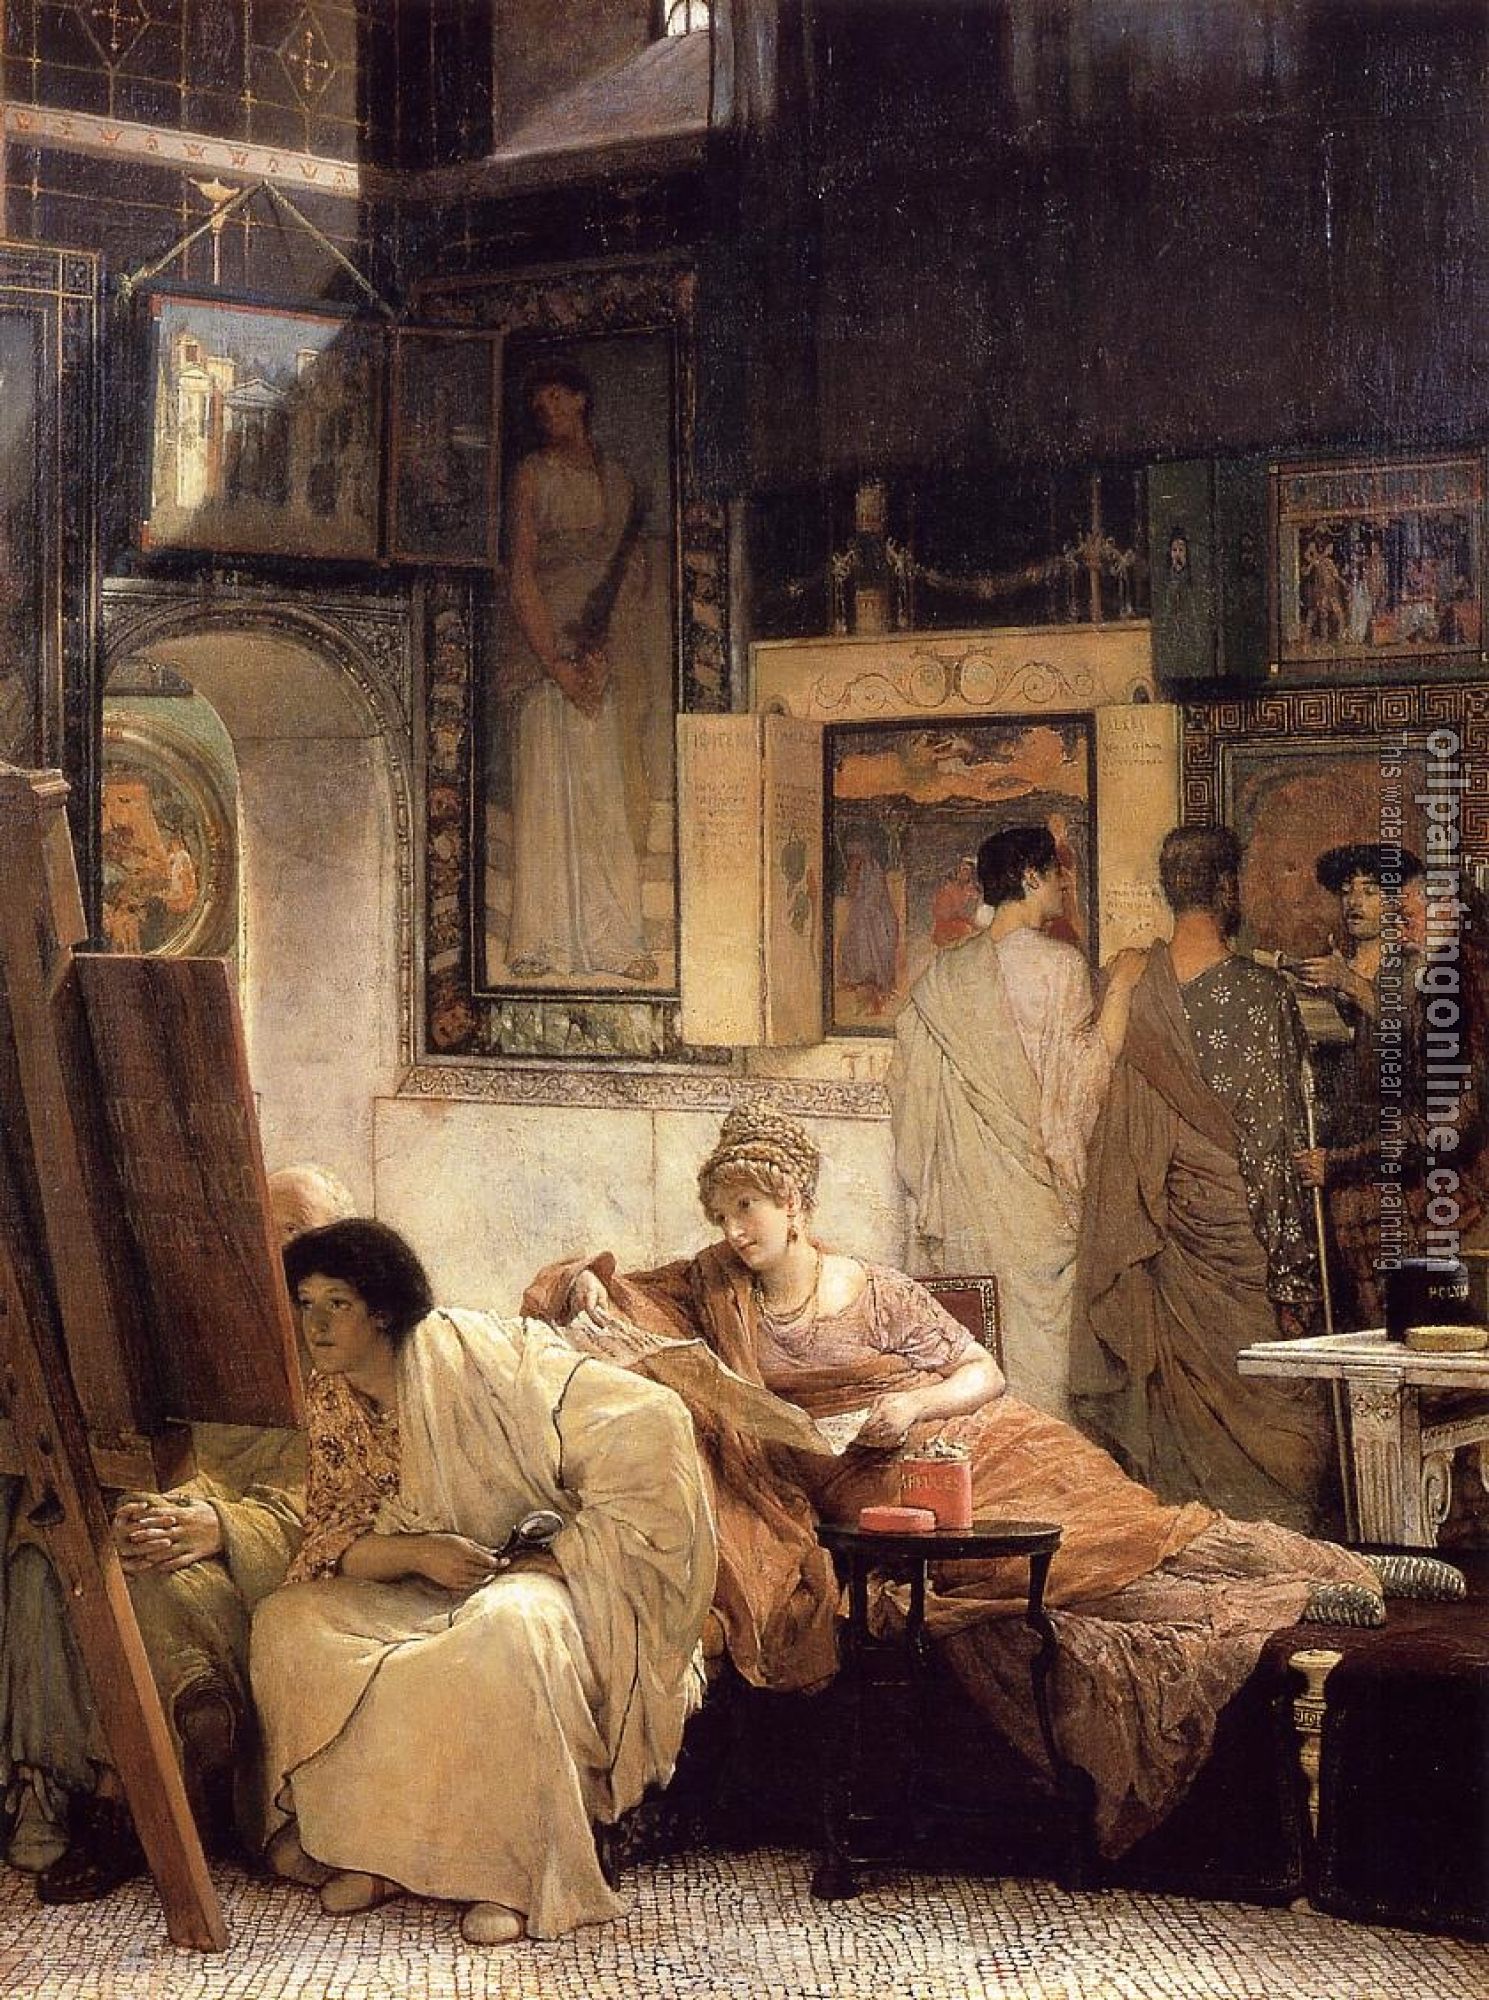 Alma-Tadema, Sir Lawrence - A Picture Gallery